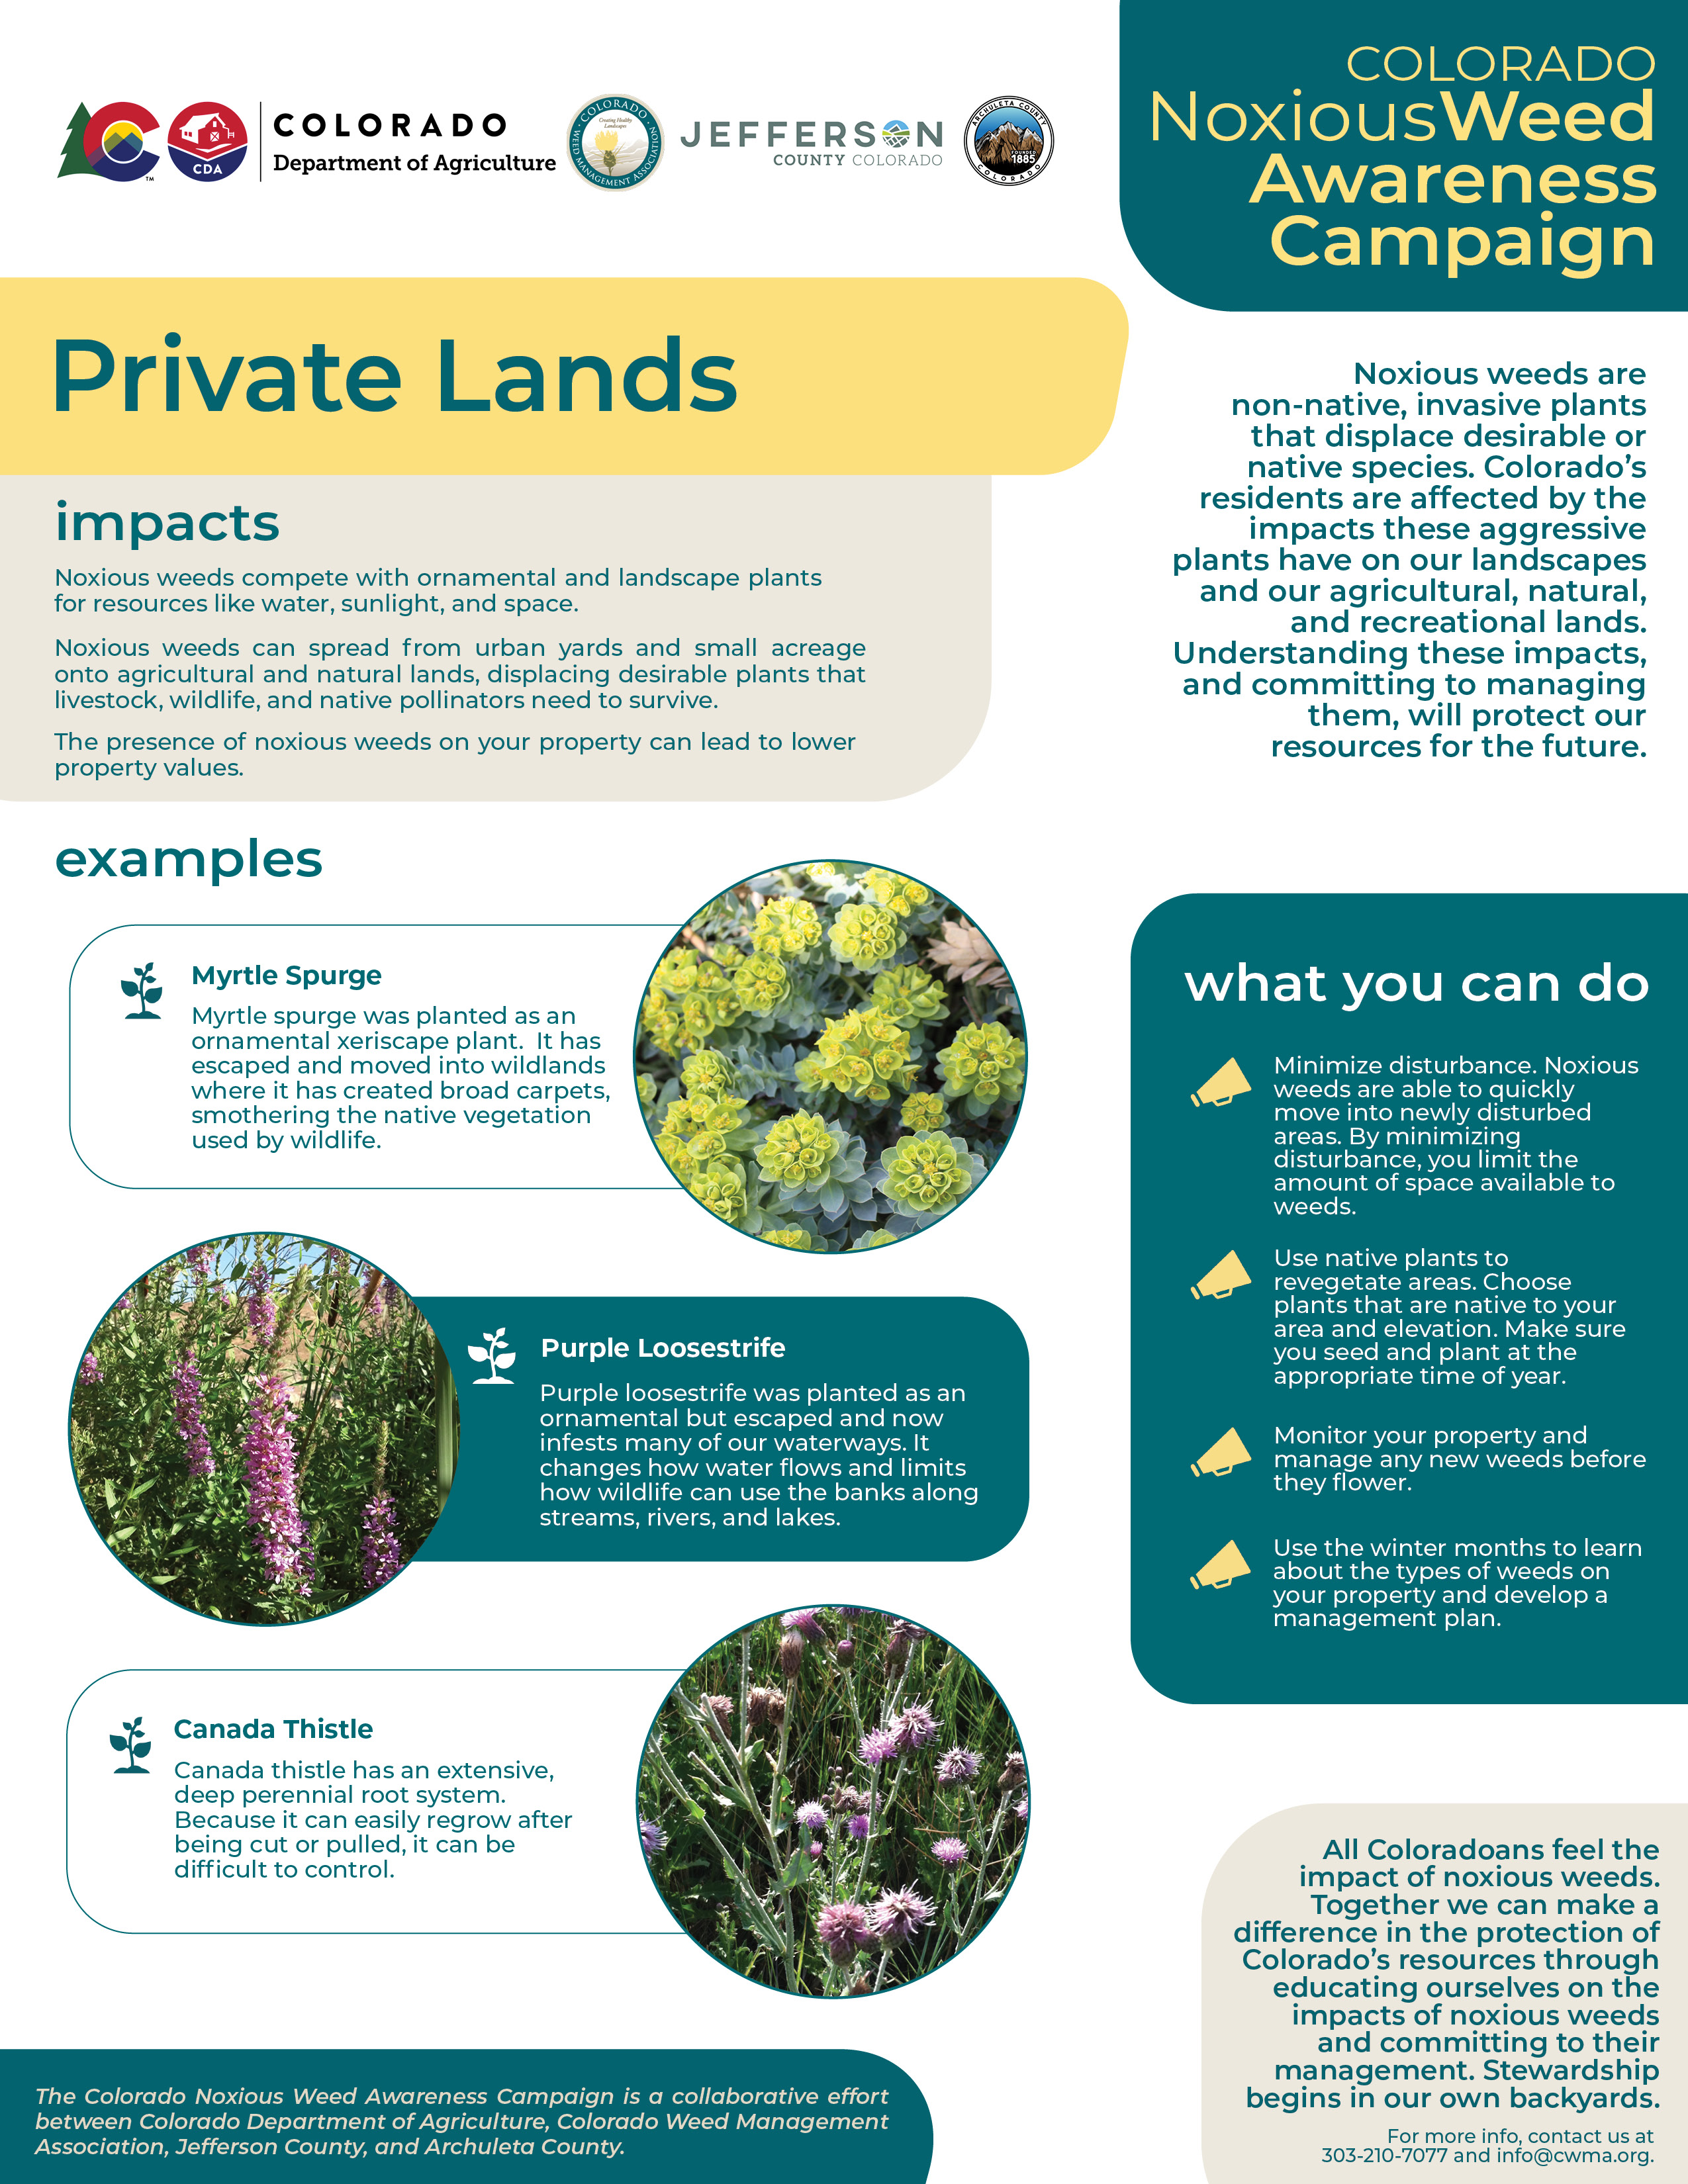 Graphic with information about how to manage noxious weeds on private lands.